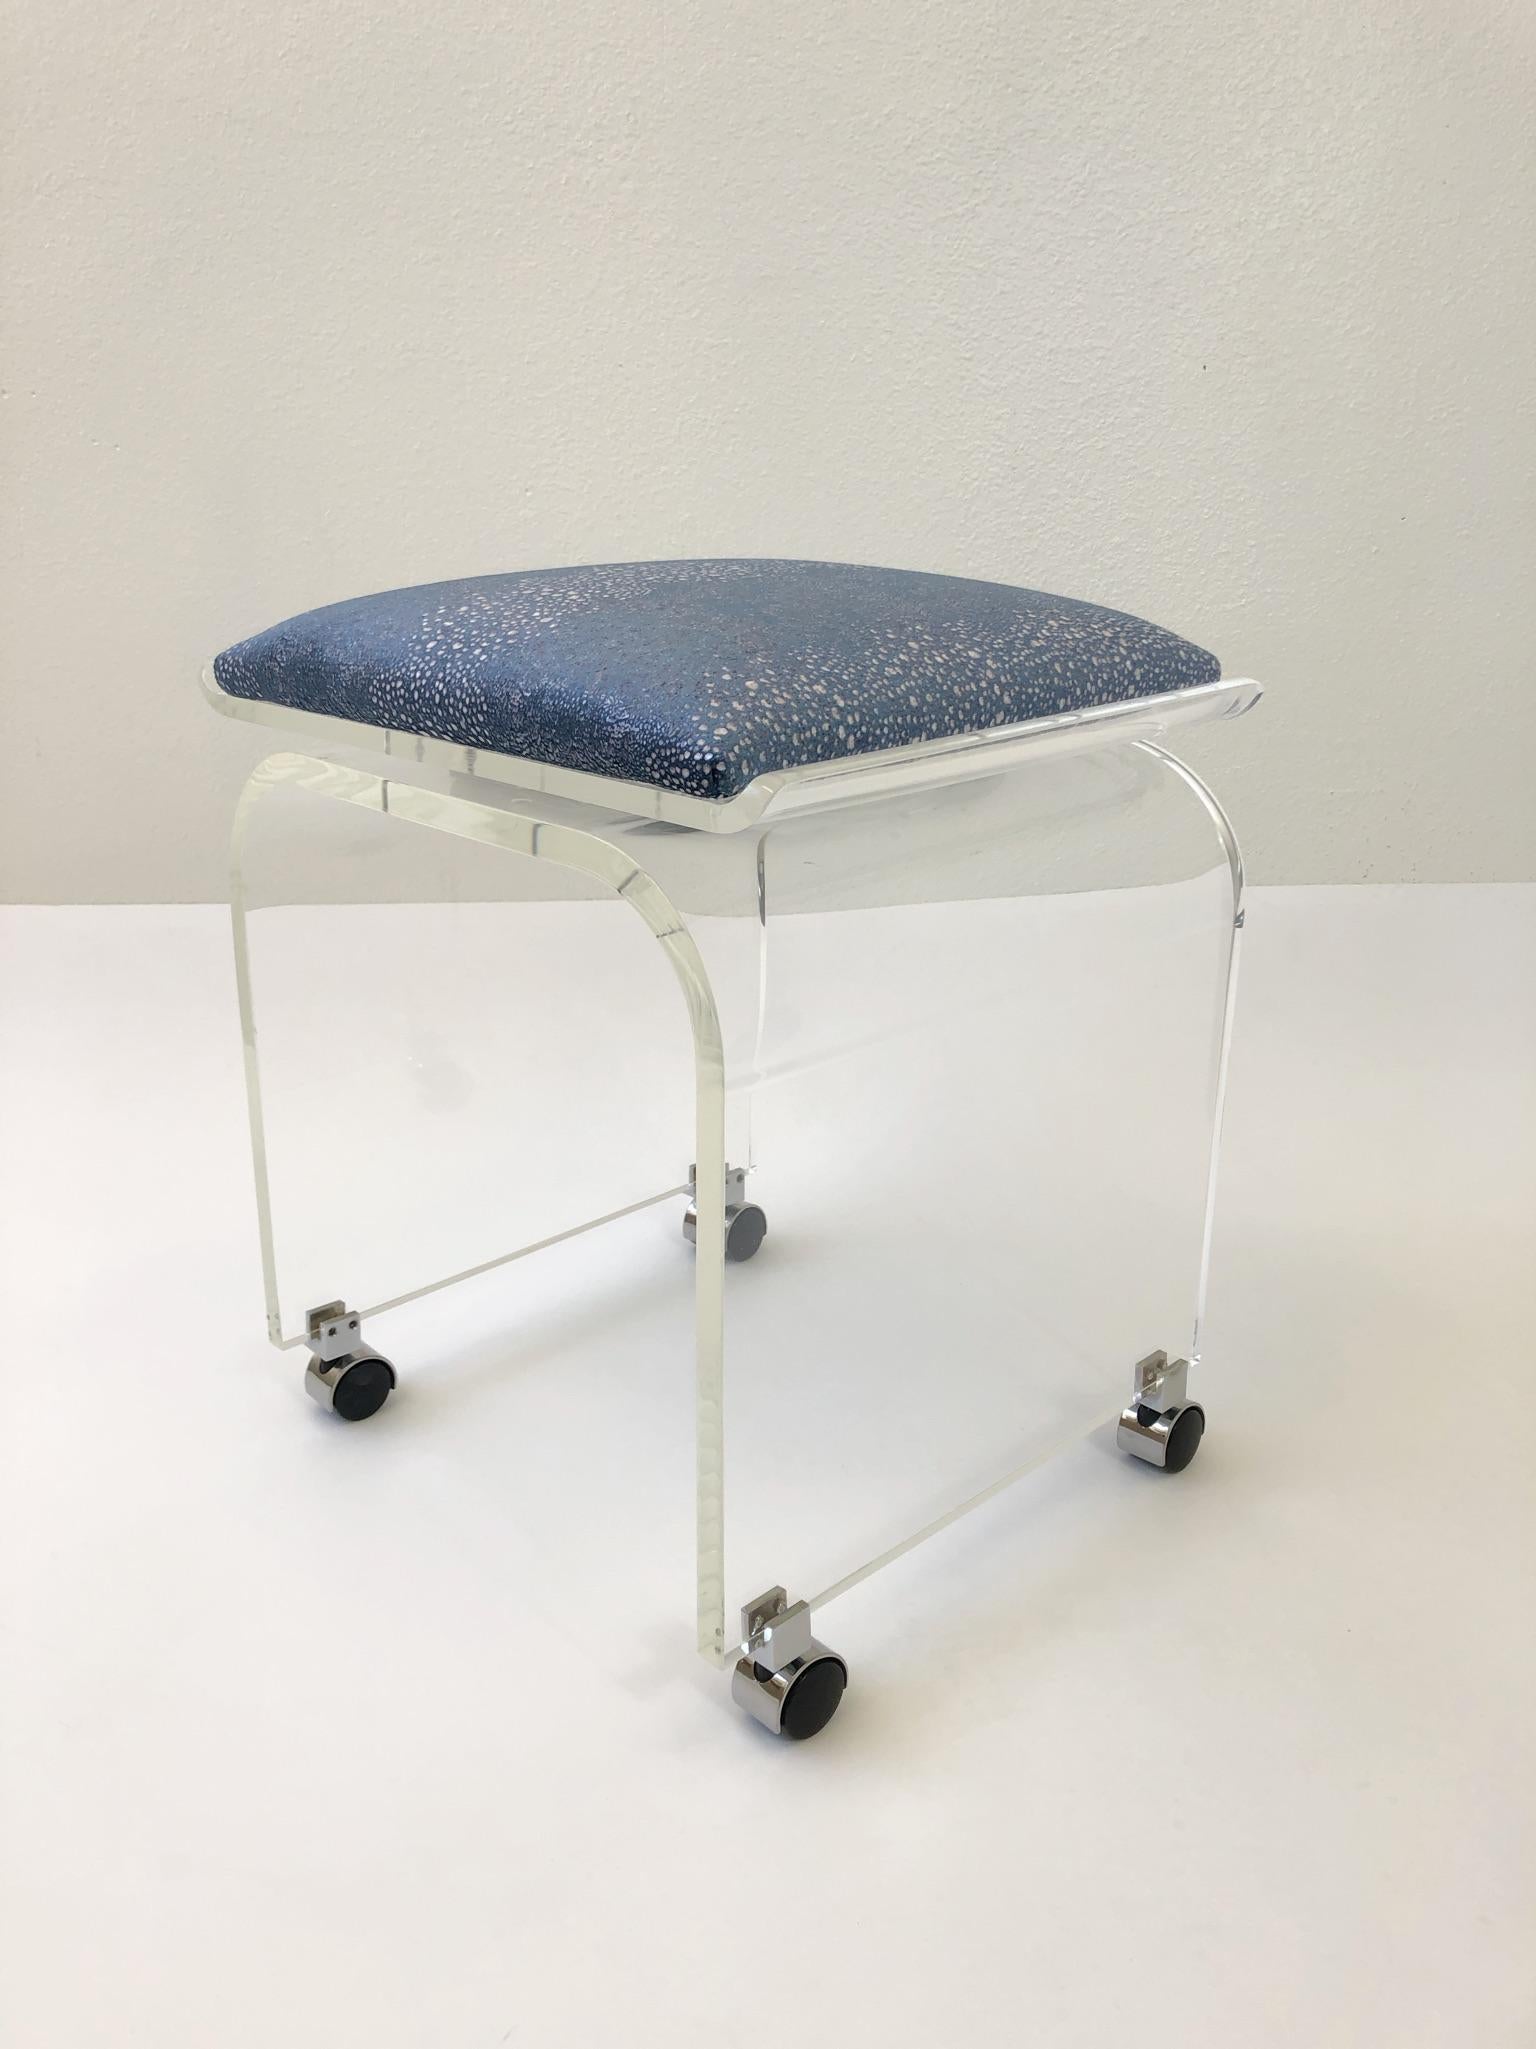 A glamorous swivel top, clear Lucite with chrome casters “Waterfall” vanity stool. Design by Charles Hollis Jones in the 1970s.
The stool has been newly professionally polished and recovered with a beautiful light blue velvet with a faux shagreen